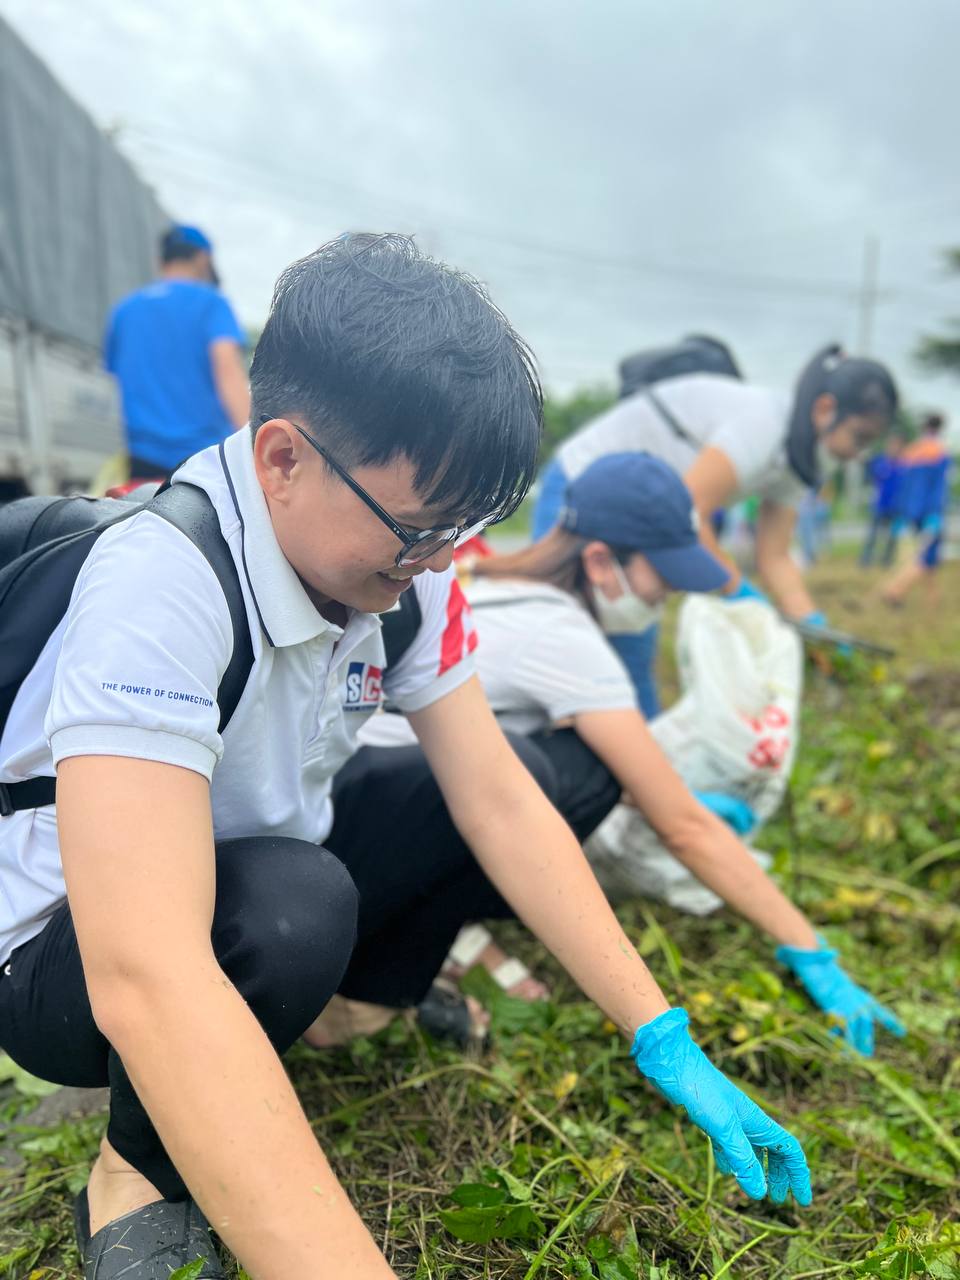 Campaign to make the world cleaner in 2023 in Ho Chi Minh City High-Tech Park